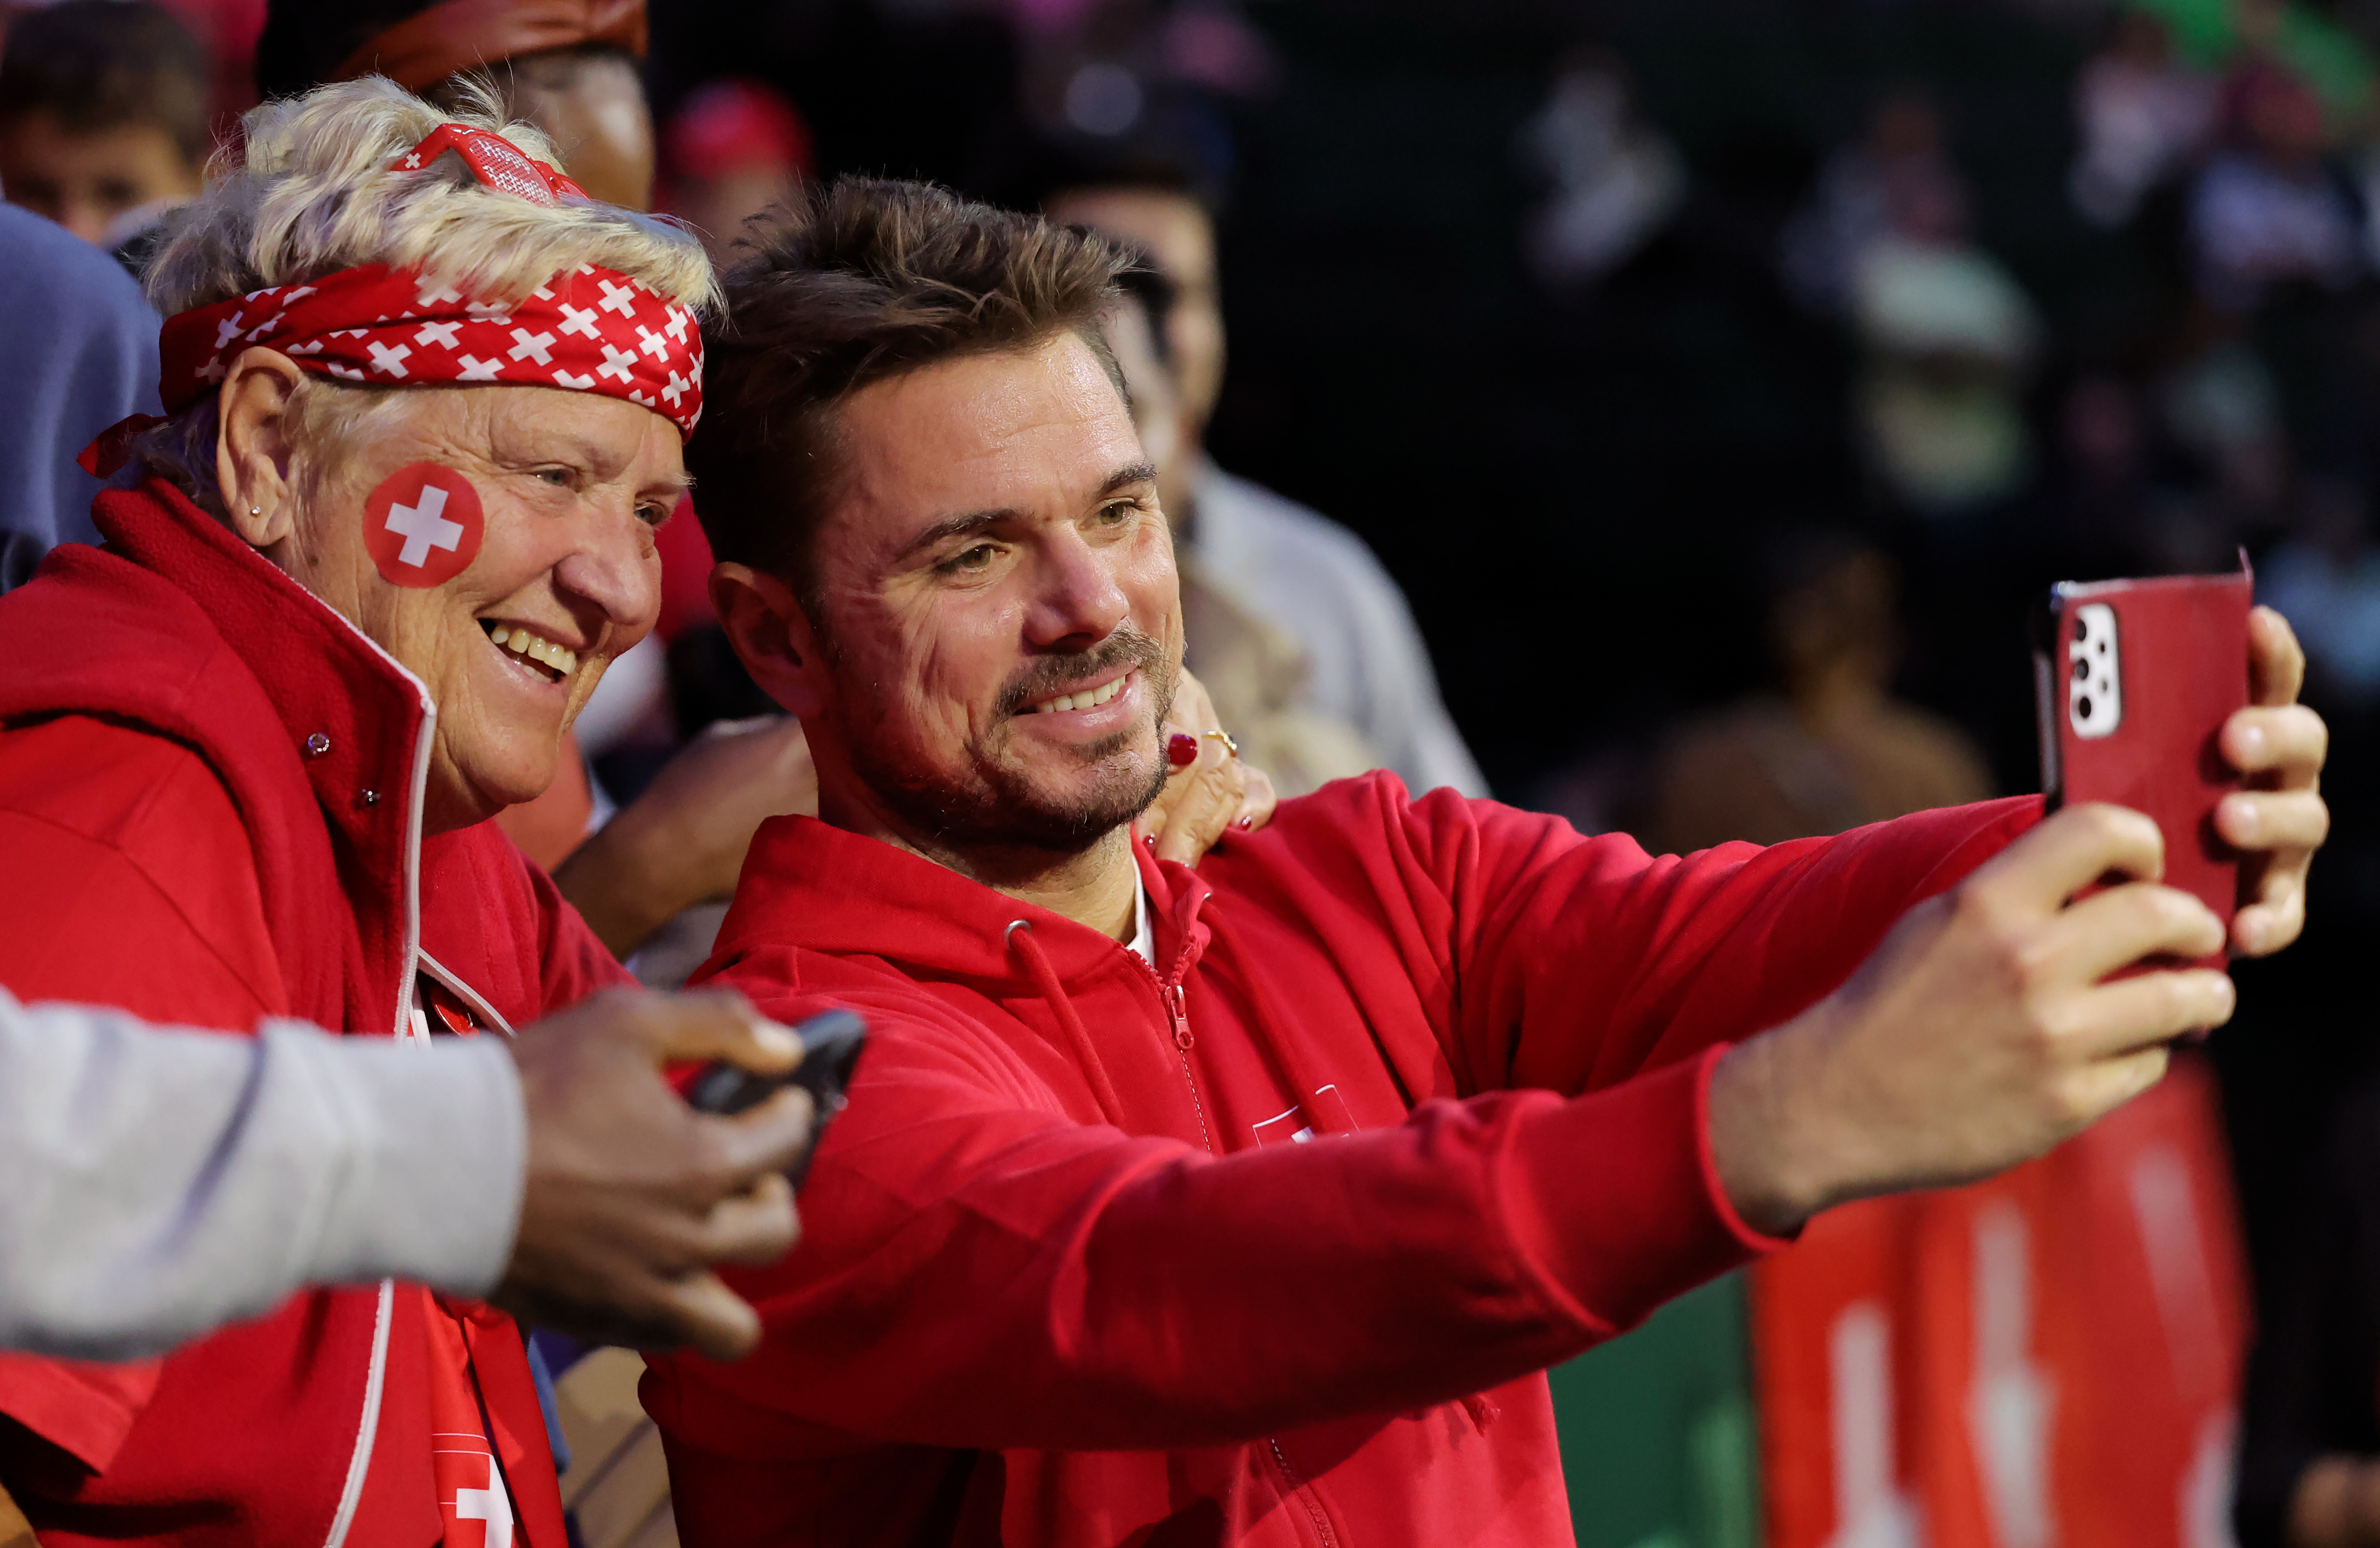 , Tennis Star Stan Wawrinka Claims Davis Cup is Full of &#8220;Paid Actors&#8221; Generating Atmosphere